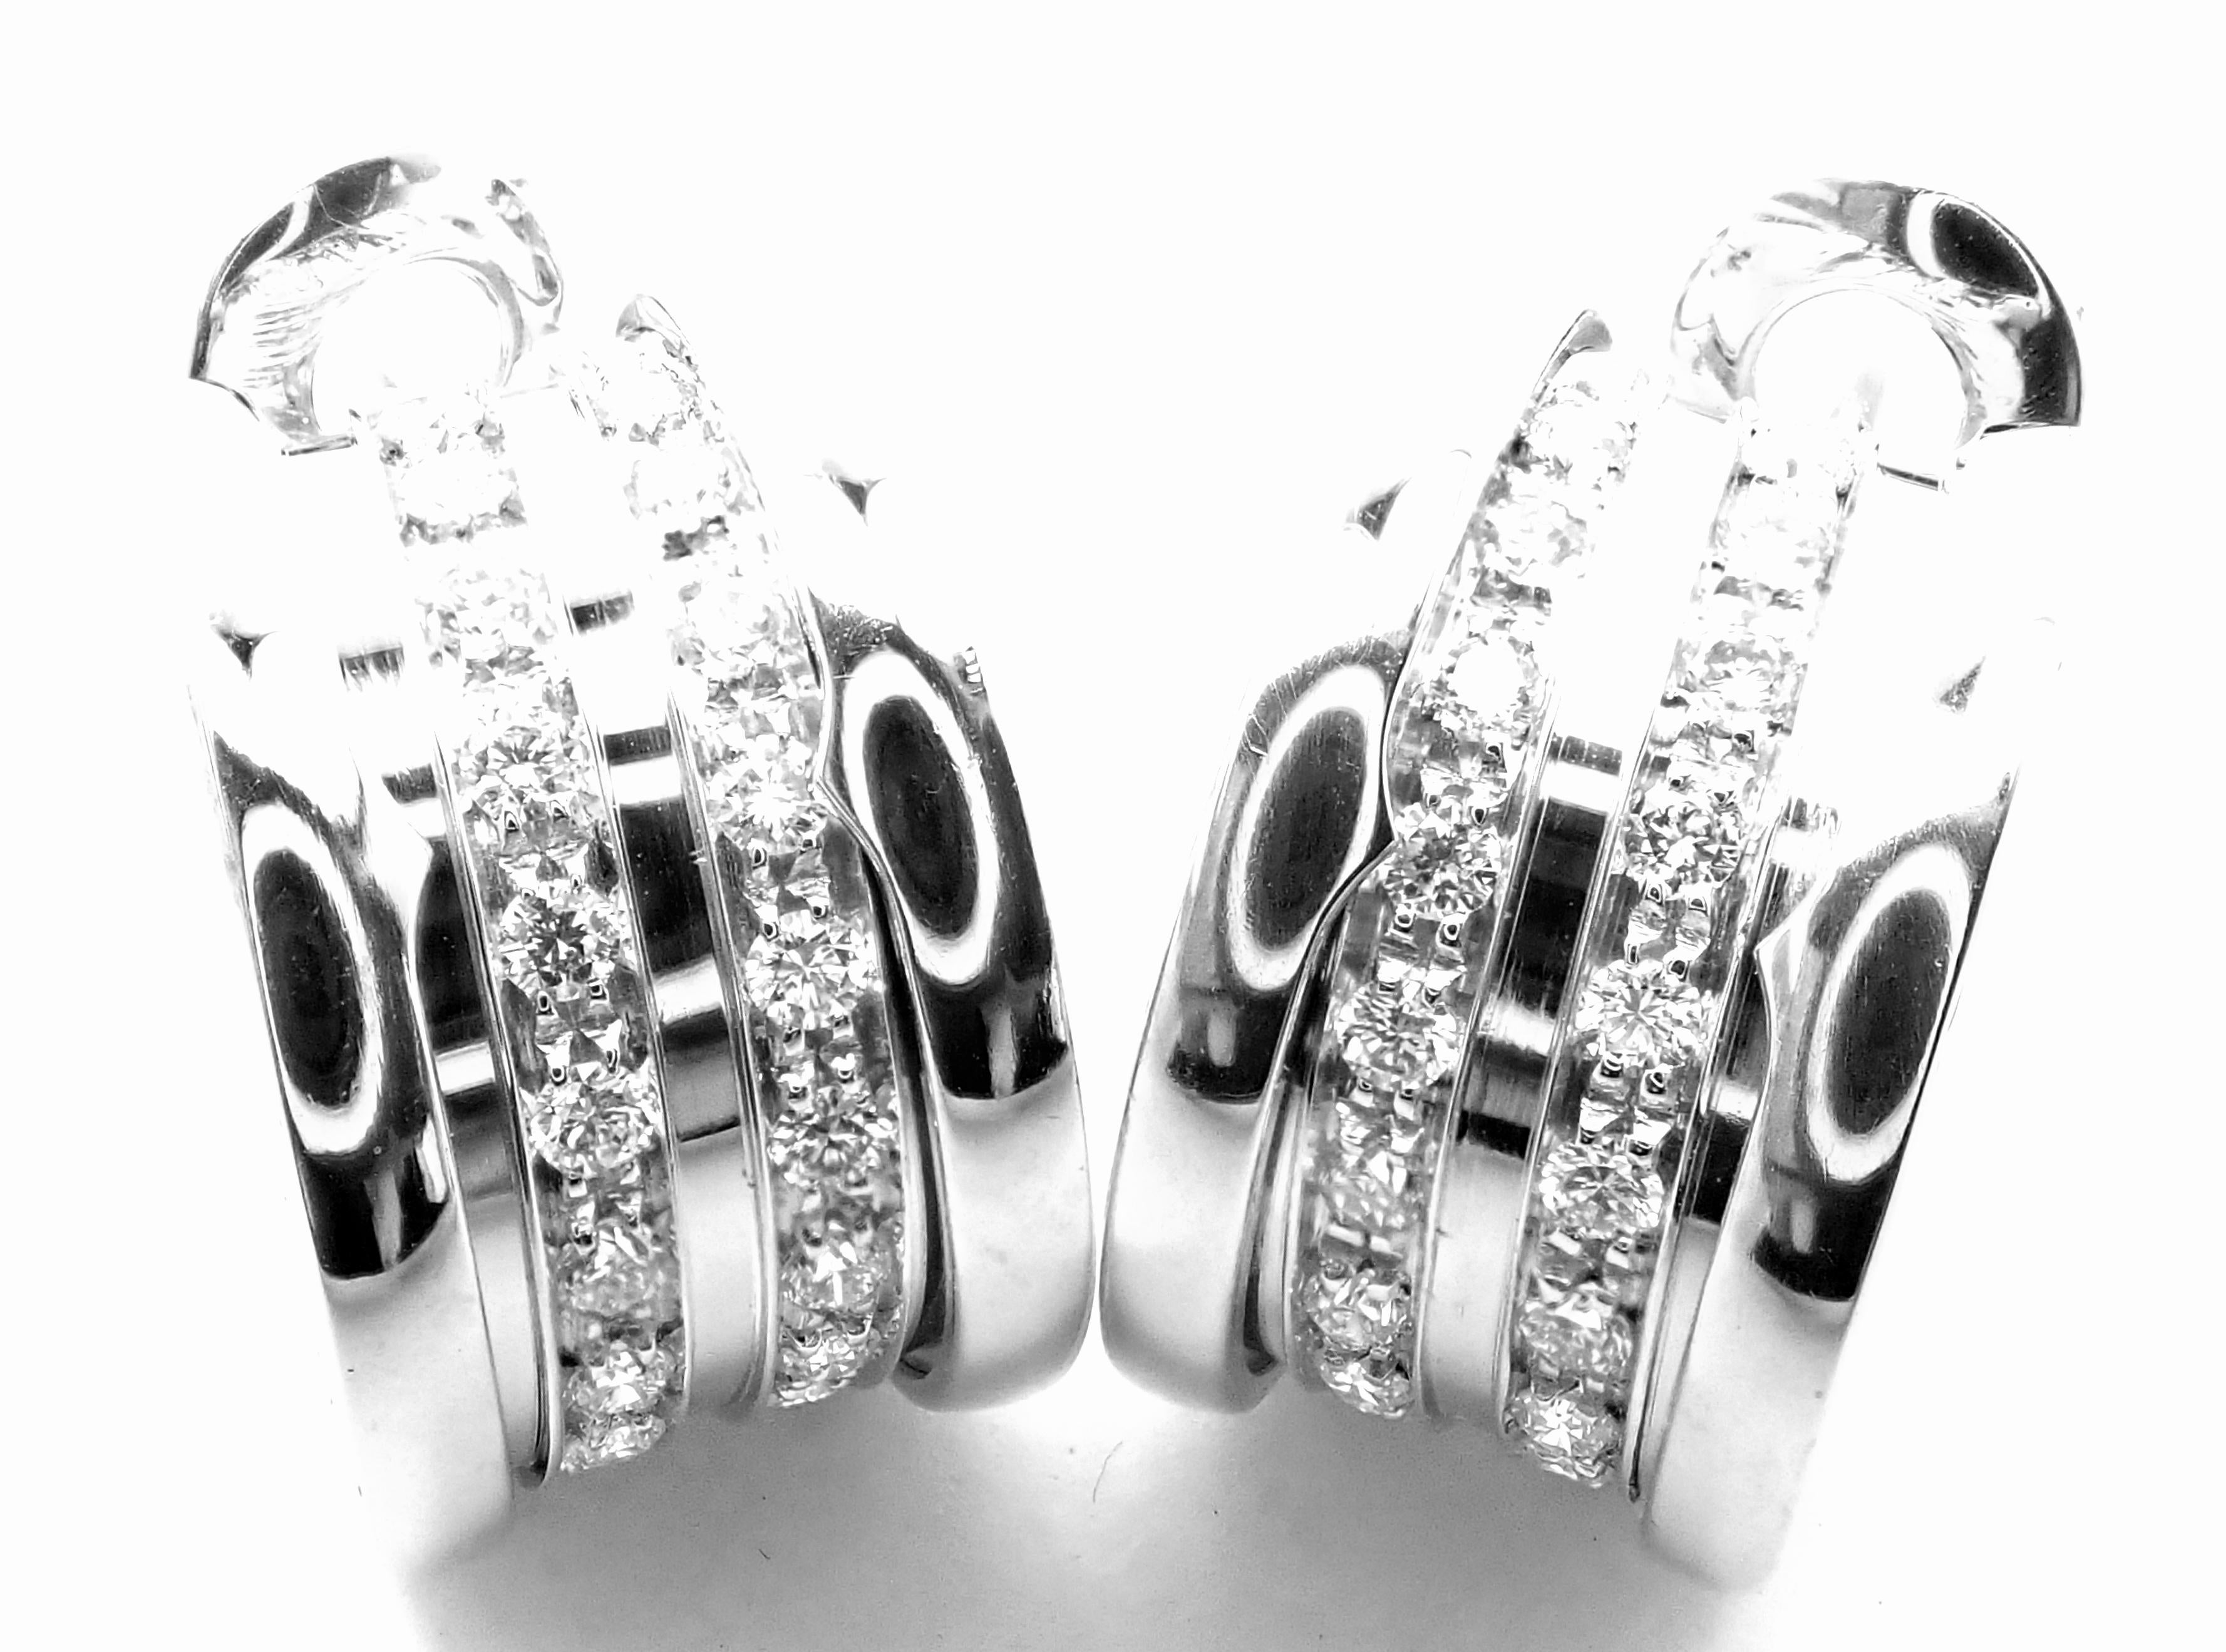 18k White Gold Diamond B.ZERO1 Hoop Earrings by Bulgari. 
With 54 round brilliant cut diamonds VVS1 clarity, E color total weight approx. 1.08ct
These earrings are for pierced ears.
Retail Price: $14,620 plus tax.
Details:
Measurements: 17mm x